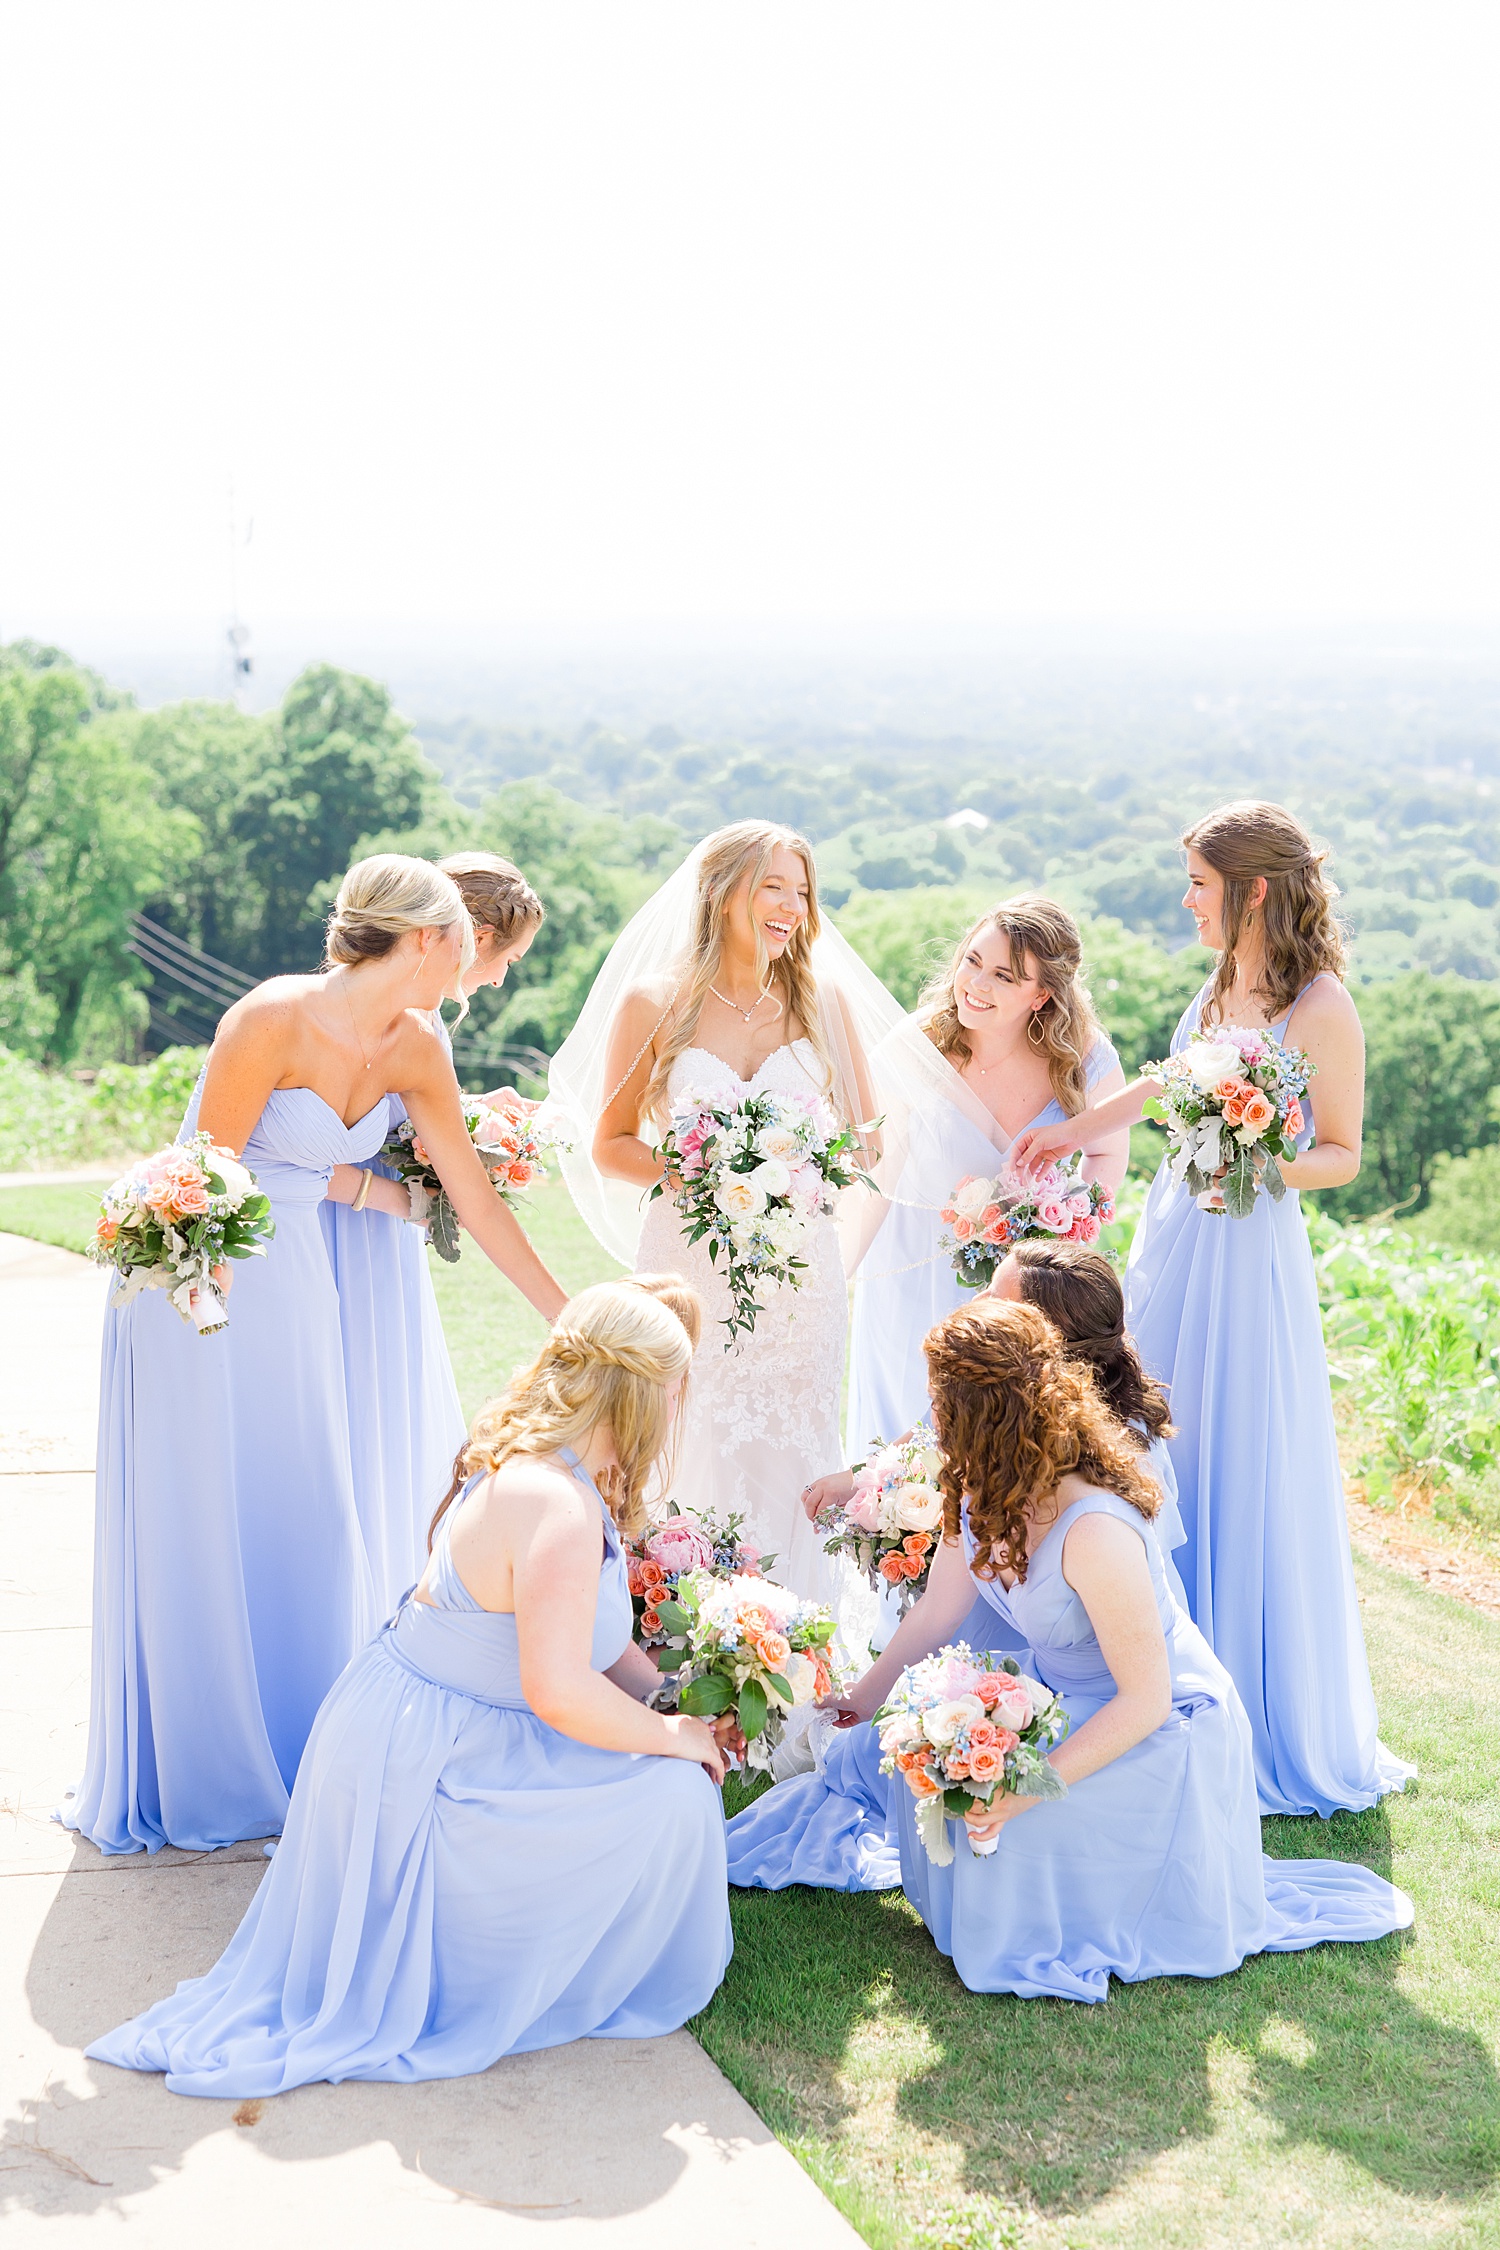 bridesmaids helping bride with dress and veil